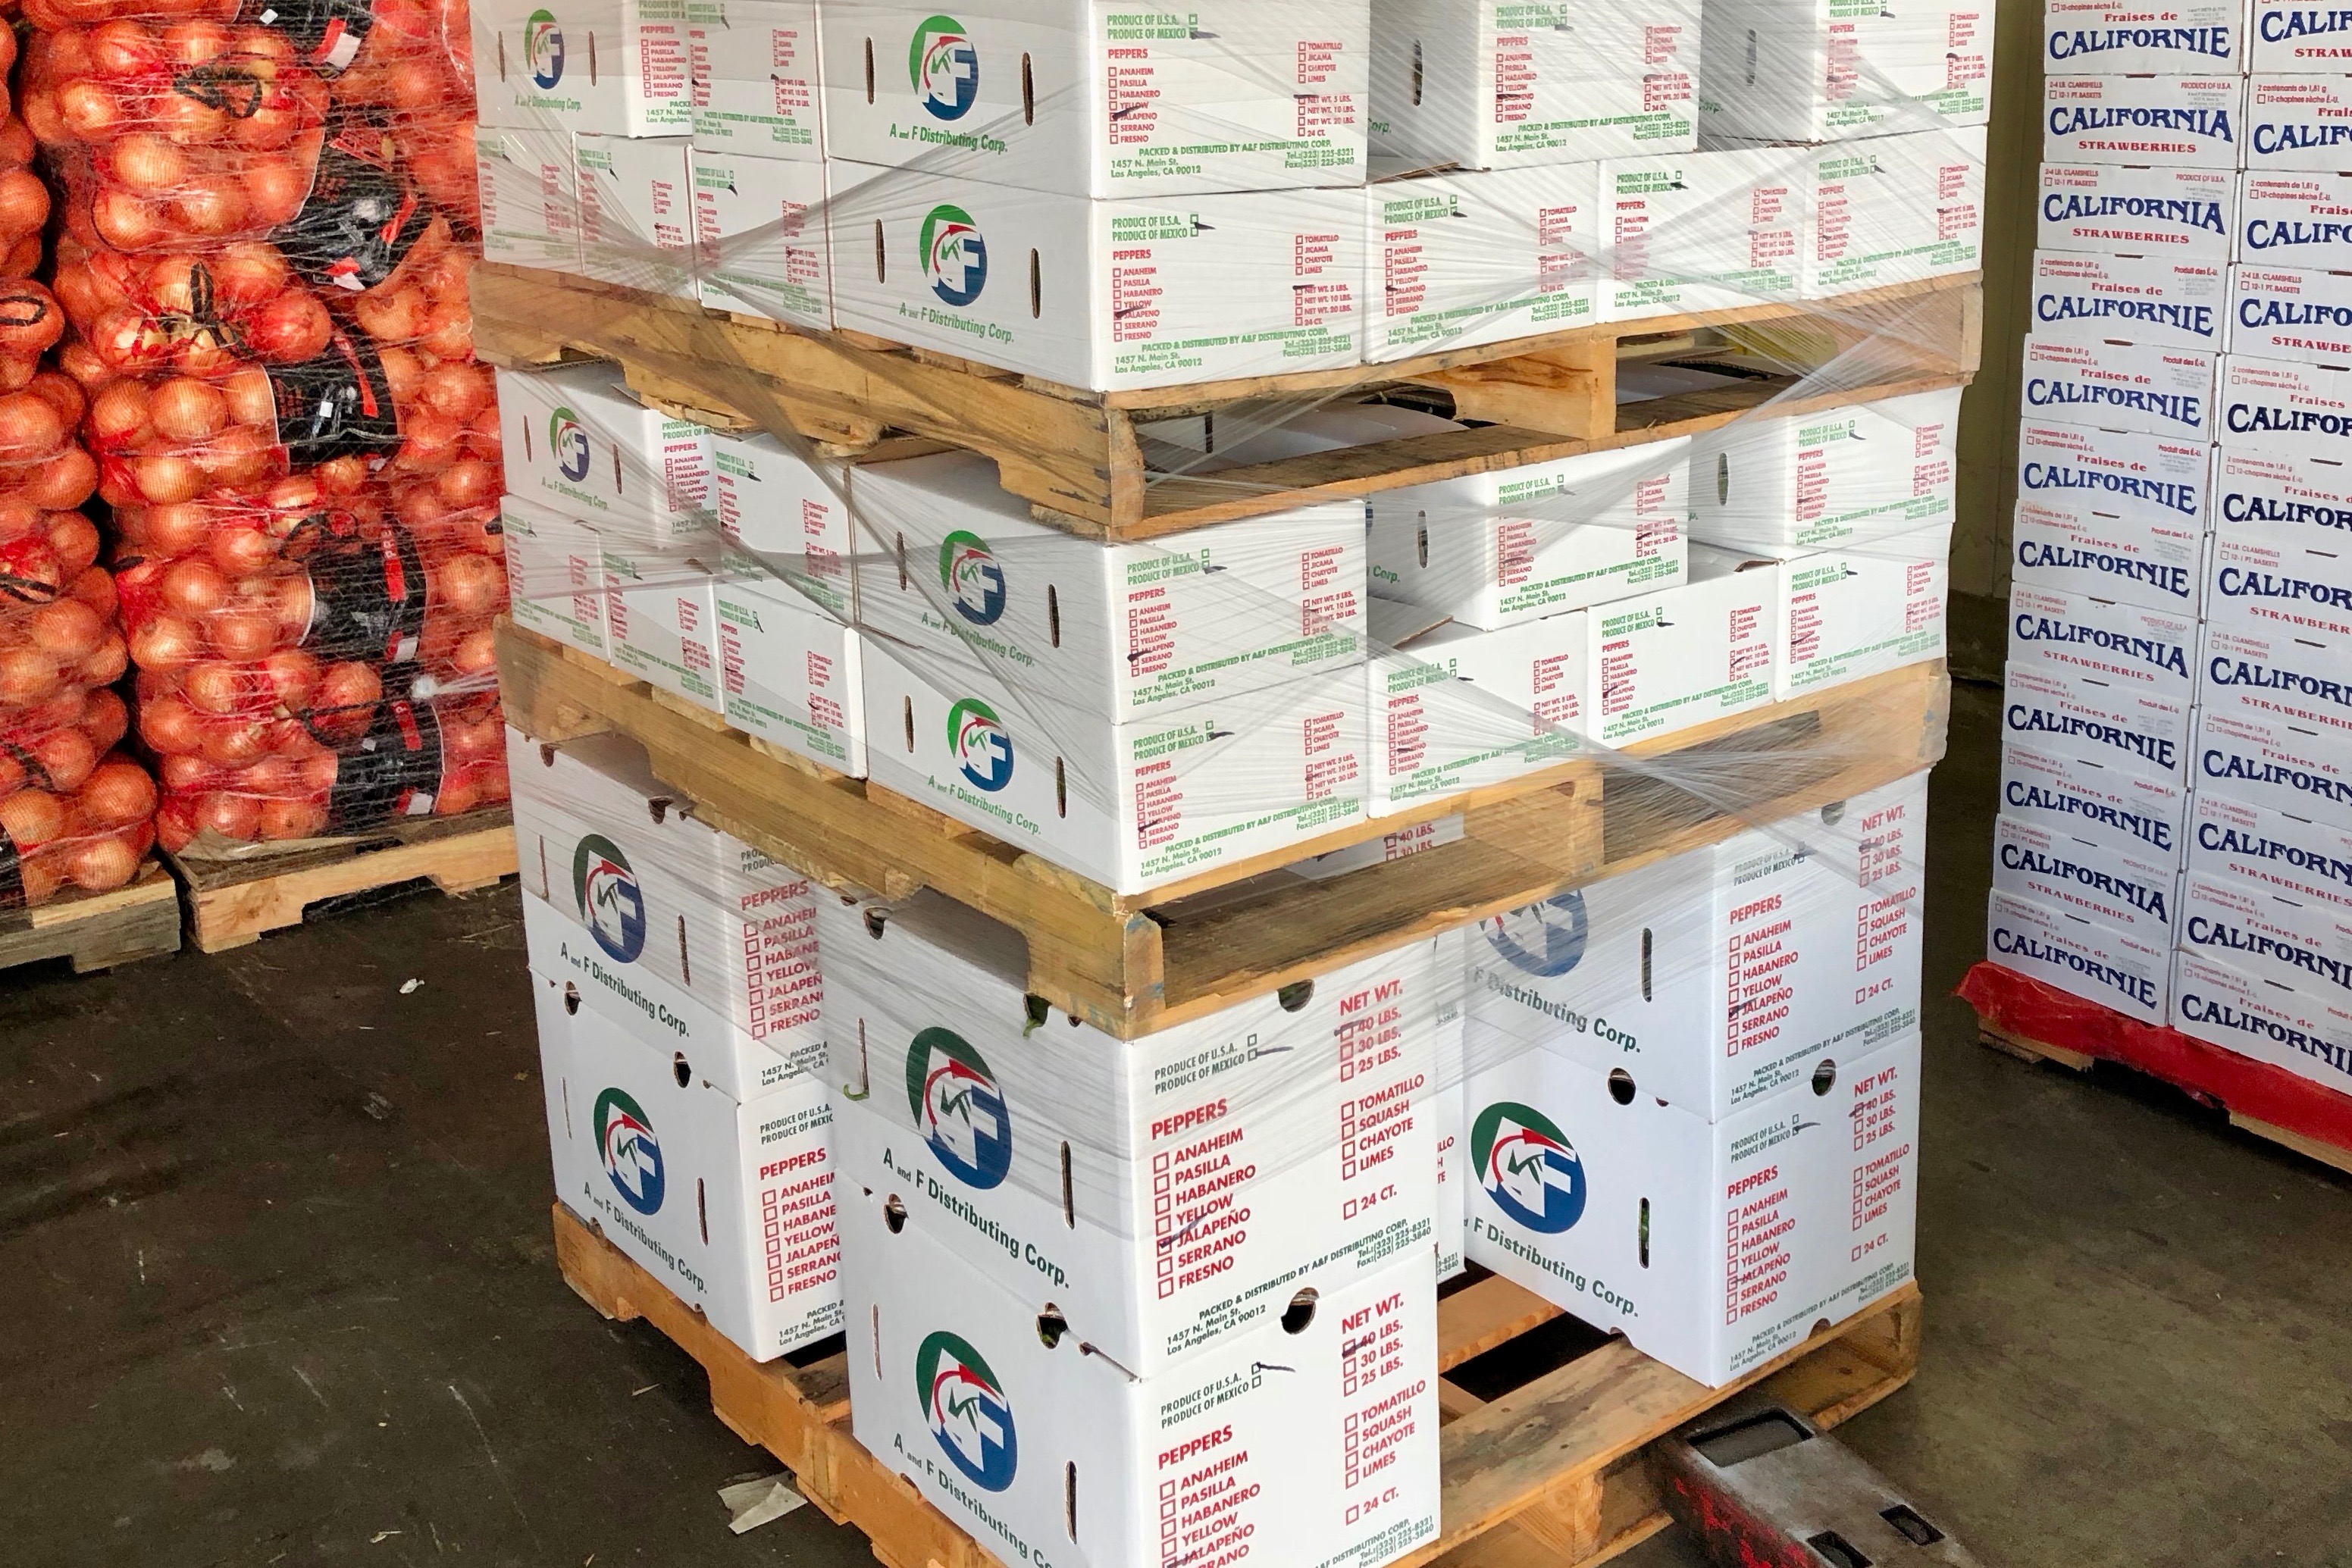 Repacked Produce from A and F Distributing Corporation.